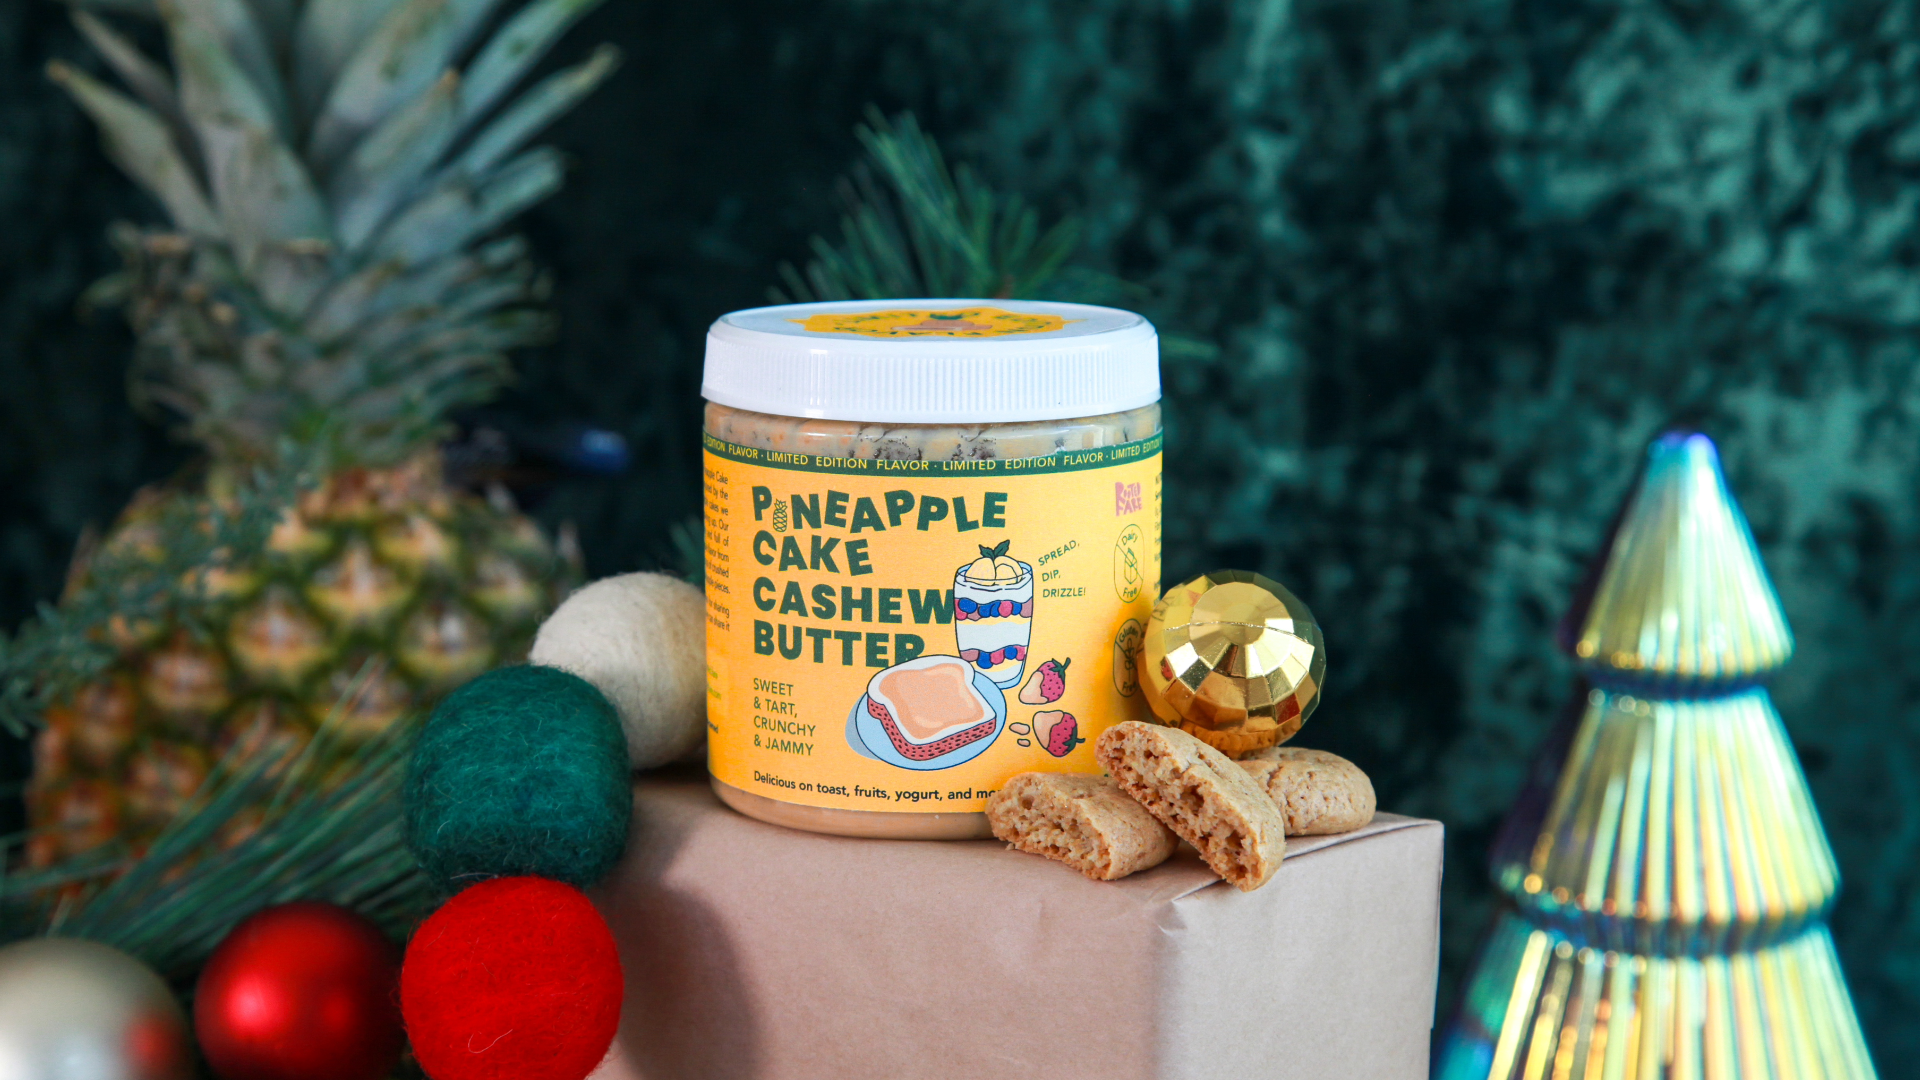 Pineapple Cake Cashew Butter (Limited-Edition Holiday Flavor)